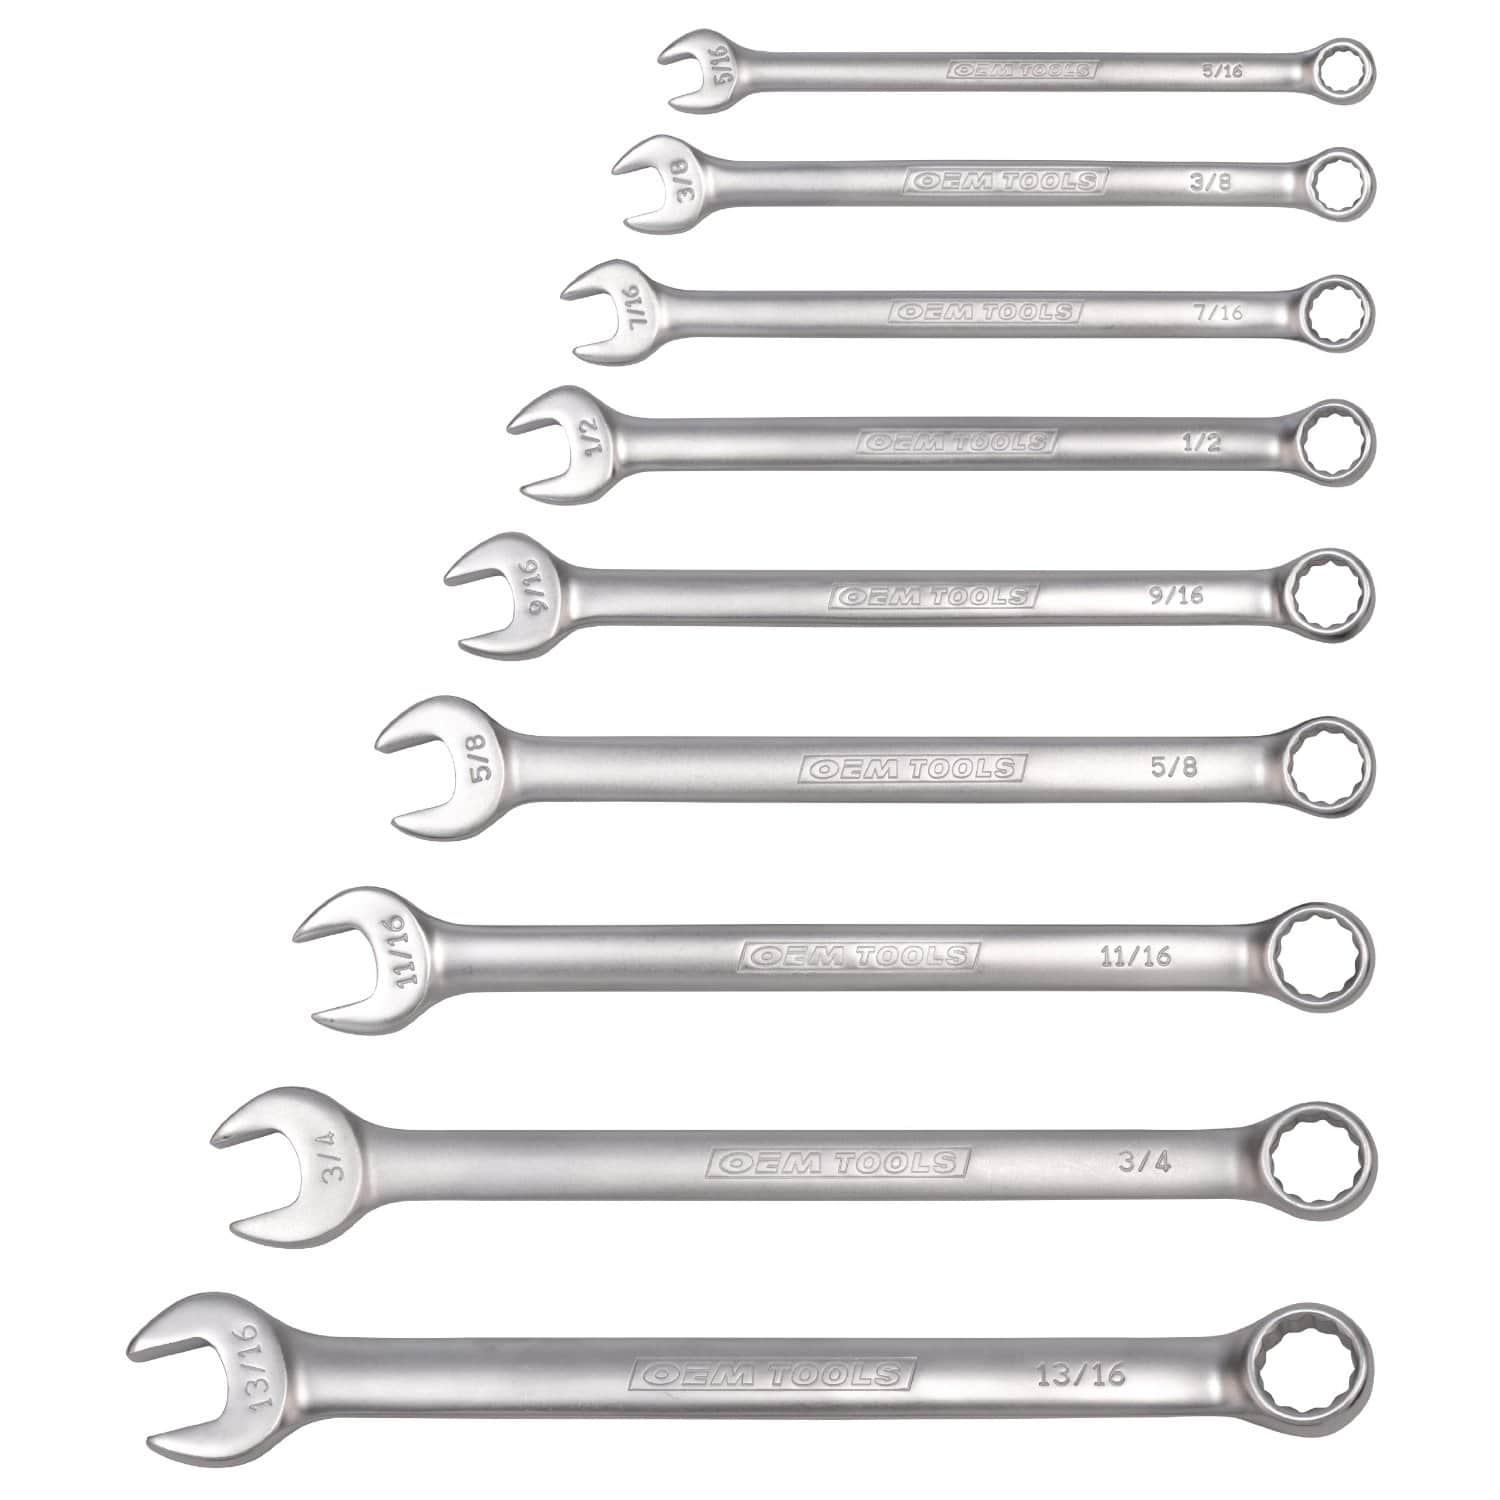 Great Neck Houseware : Tool Sets Great Neck 9 Piece Metric Combination Wrench Set